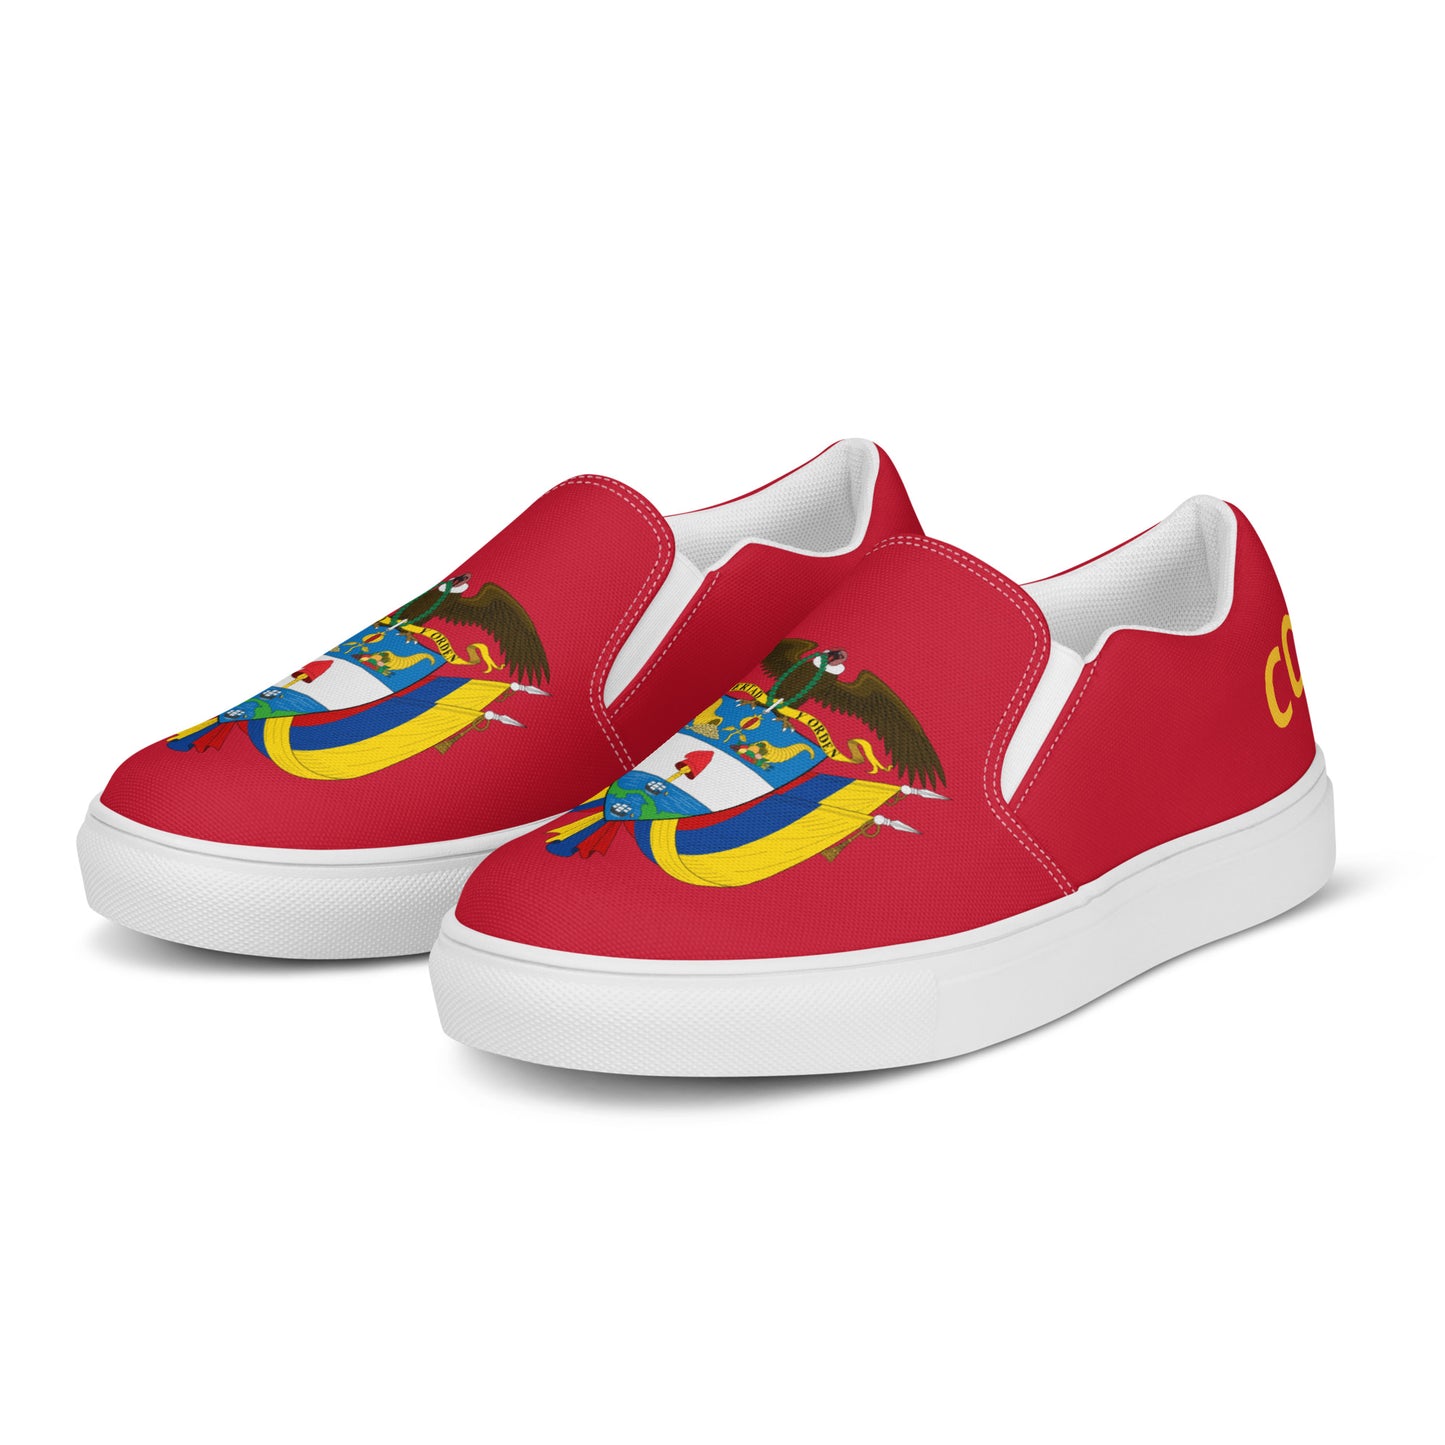 Colombia - Men - Red - Slip-on shoes